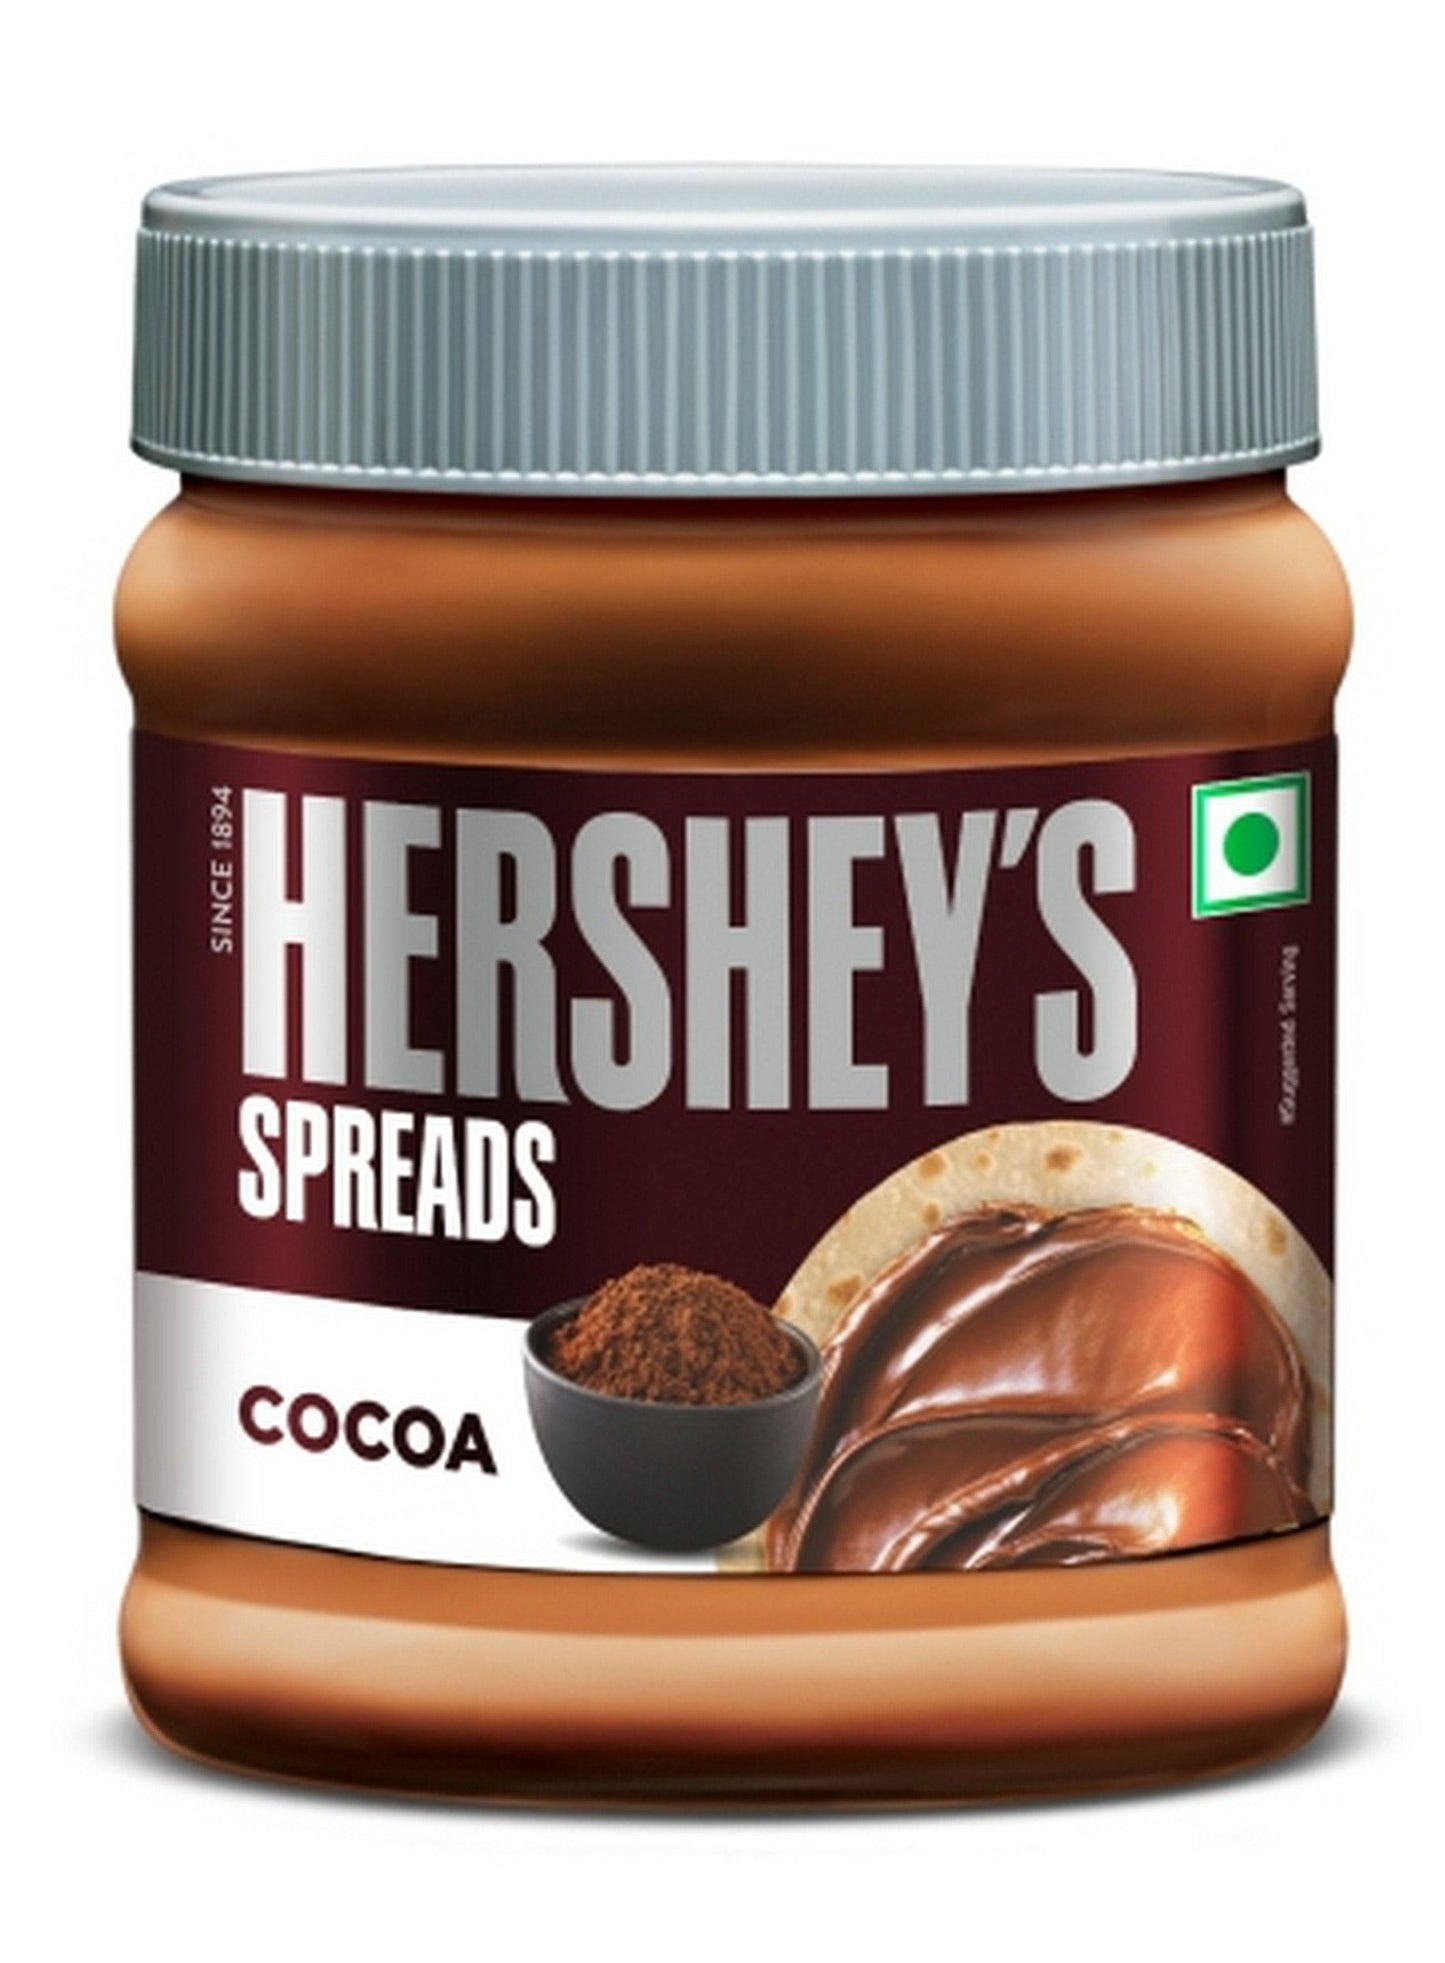 Hershey Spreads, Cocoa, 350g